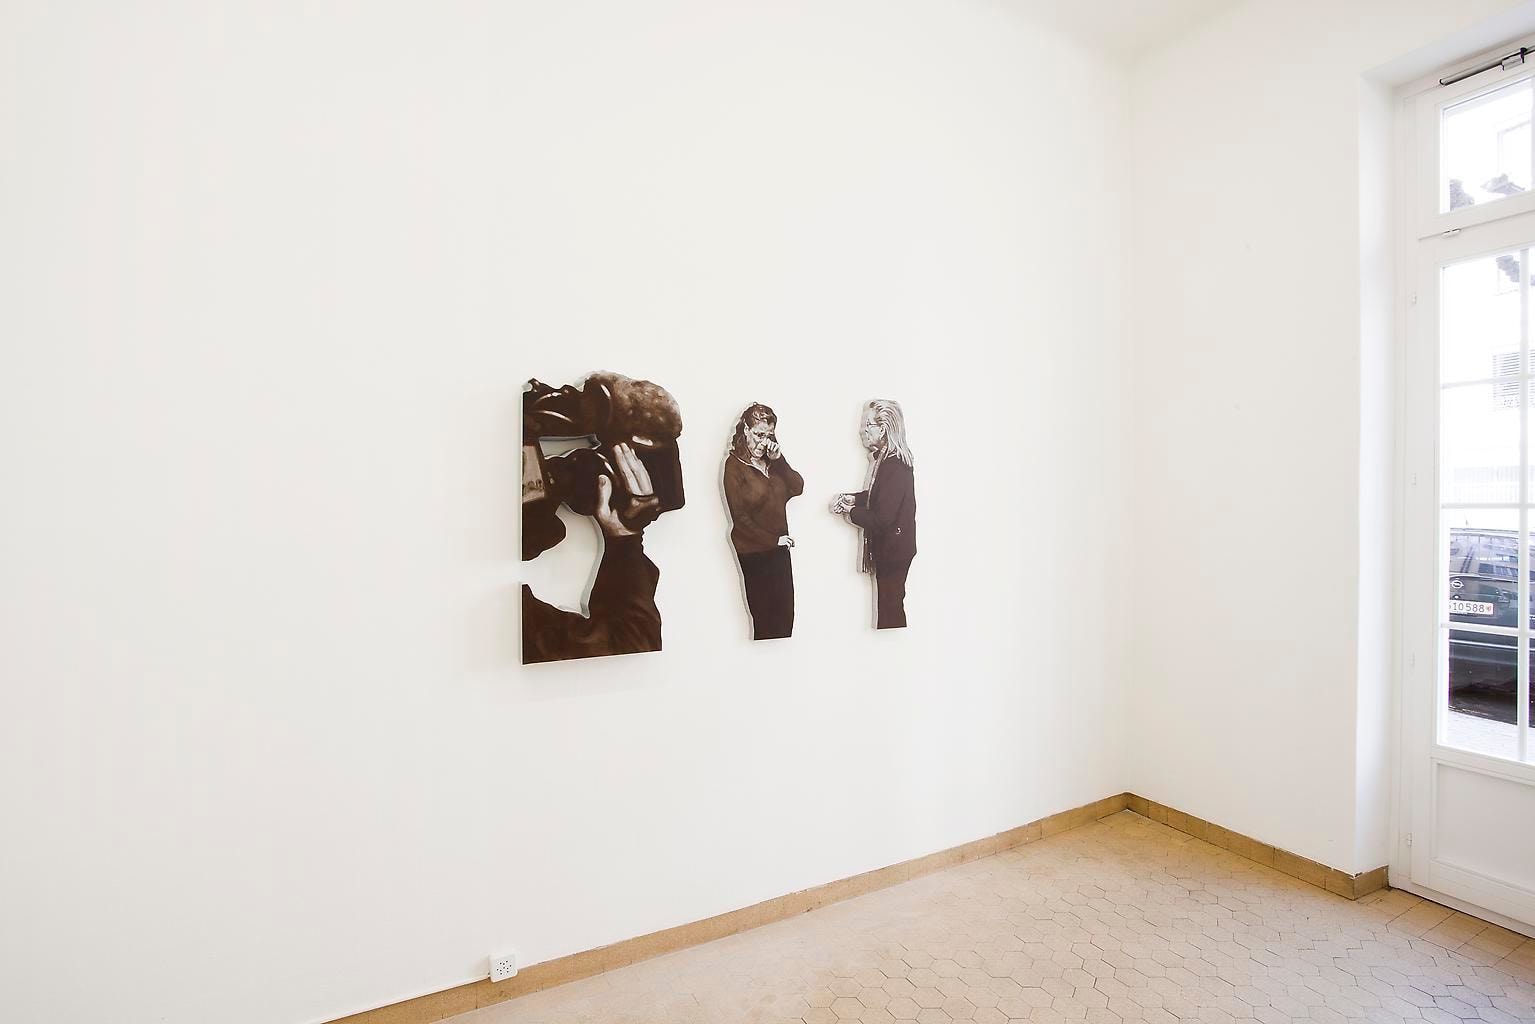  Installation view, John Miller, Subjective Monuments, Marc Jancou, Genvas, May 2 - July 27, 2013